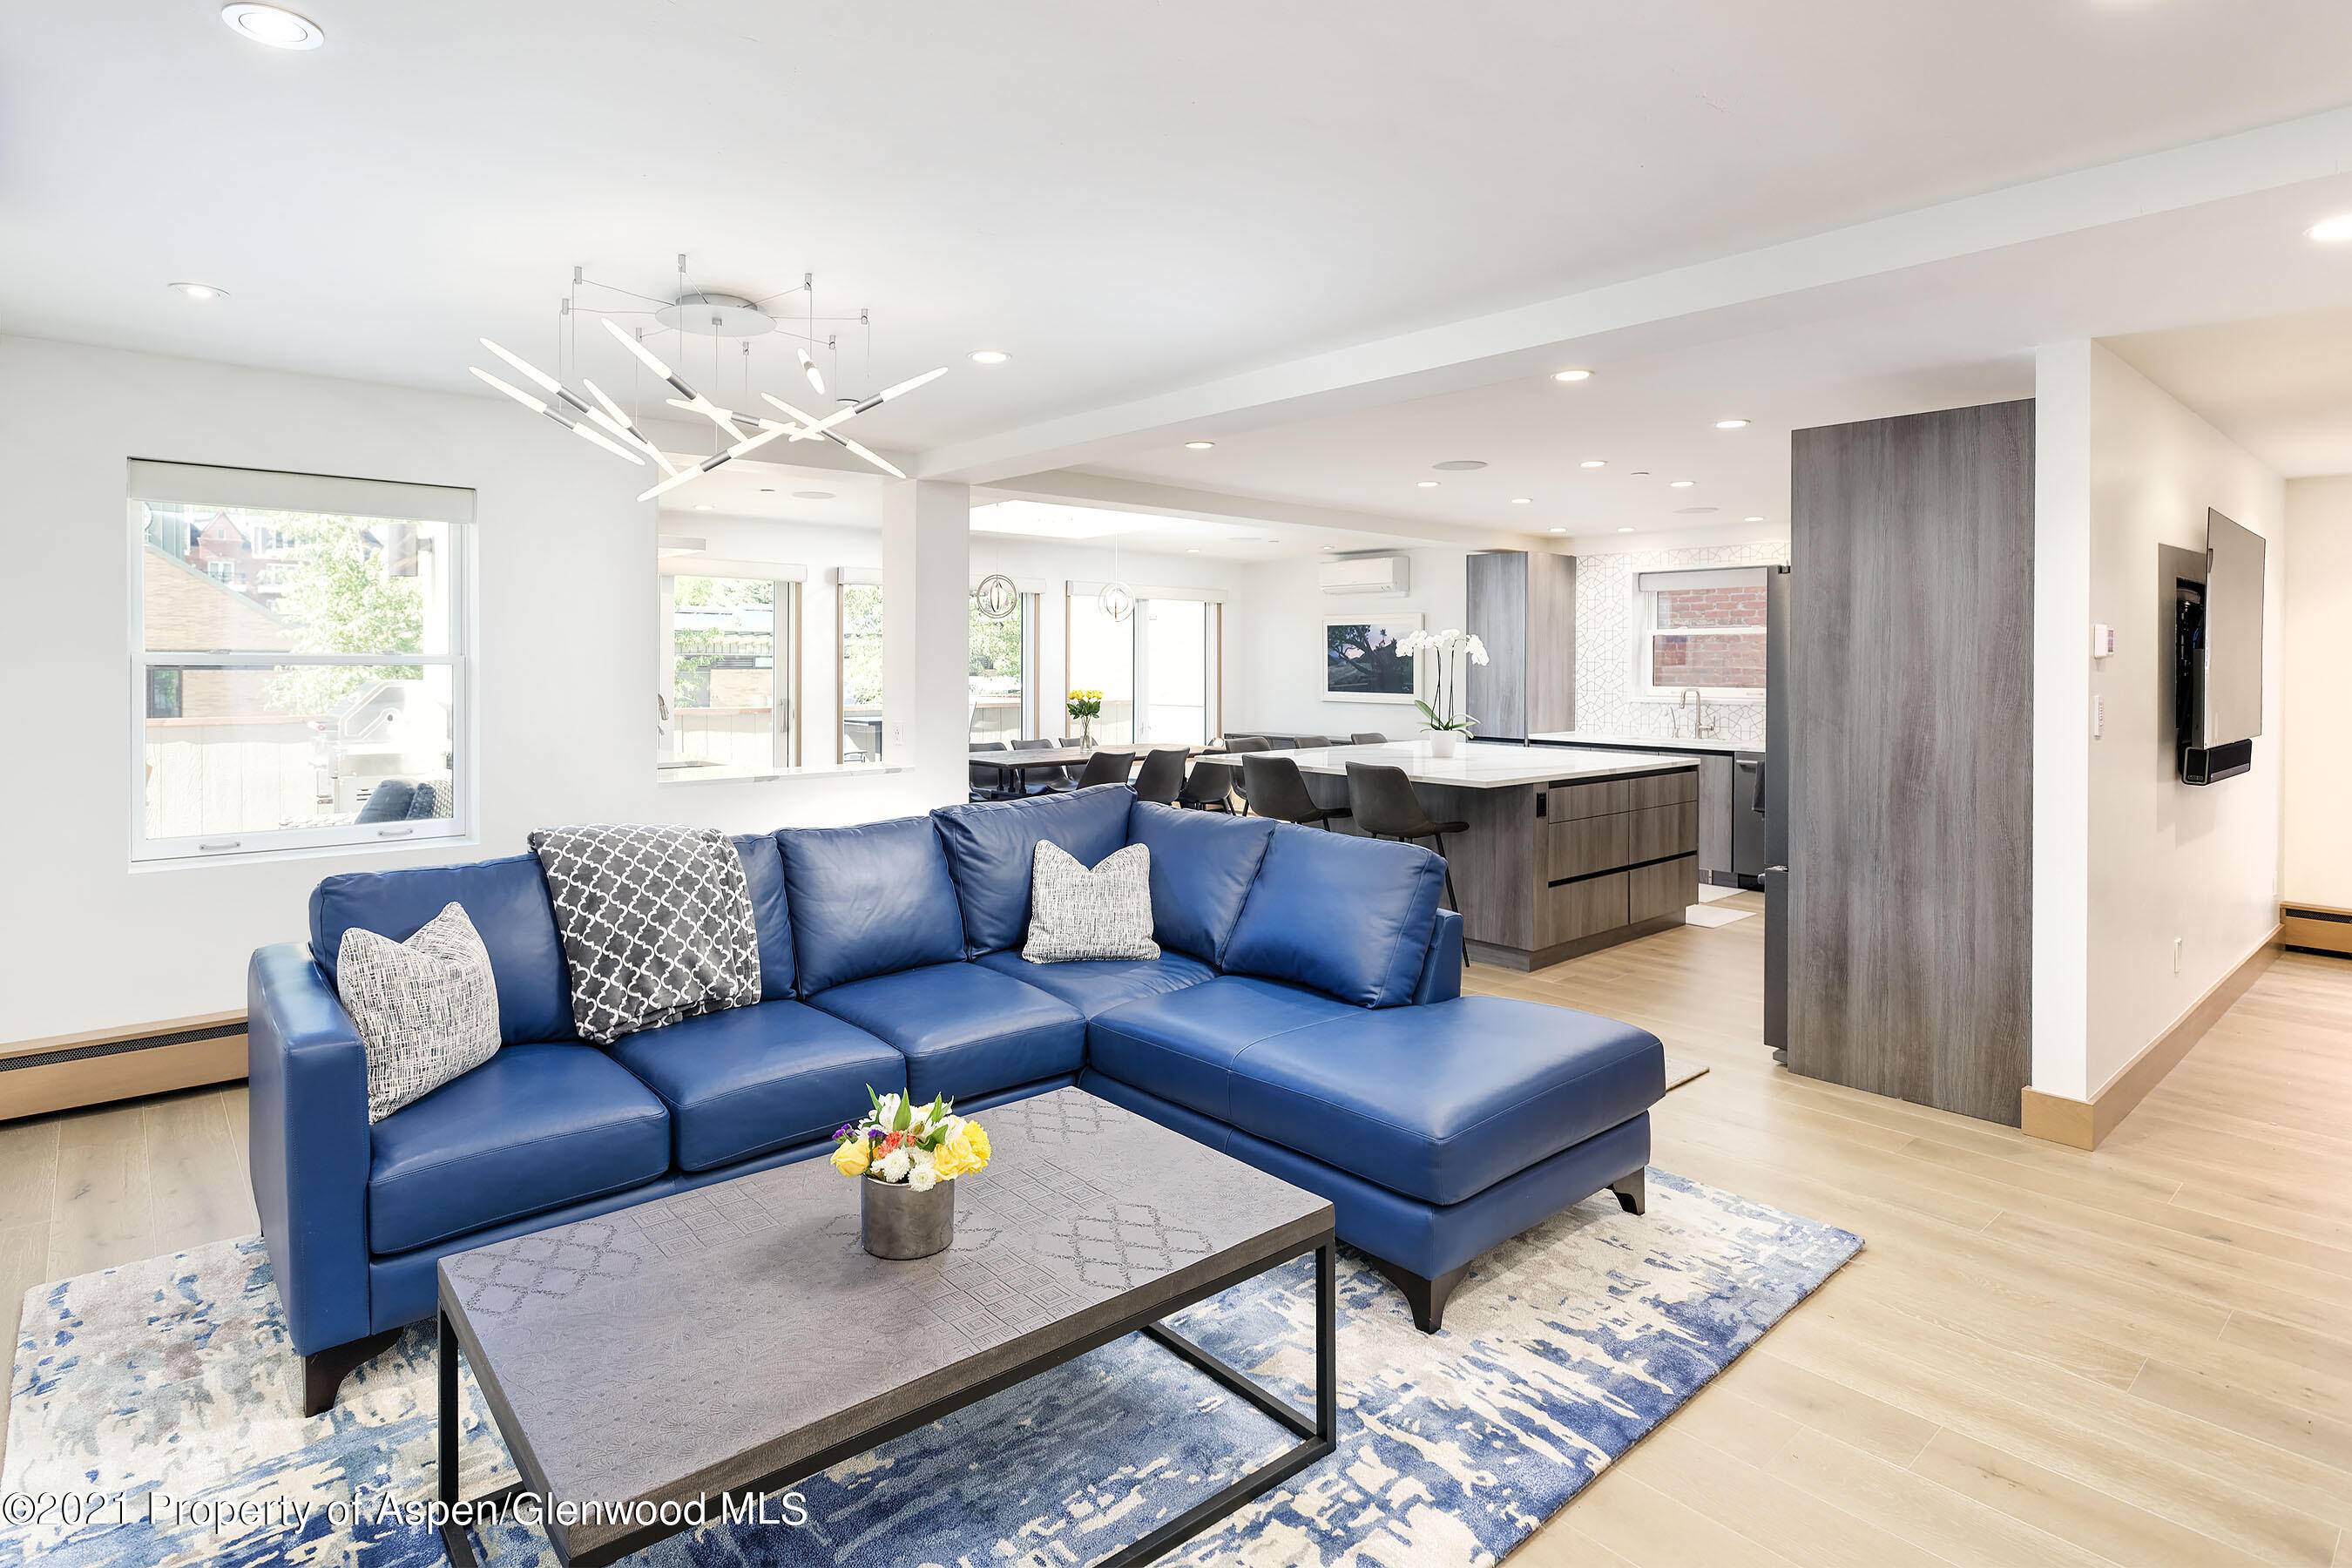 This newly renovated, never before offered, 2000 square foot penthouse in the very heart of Aspen's downtown Mall will exceed your expectations.